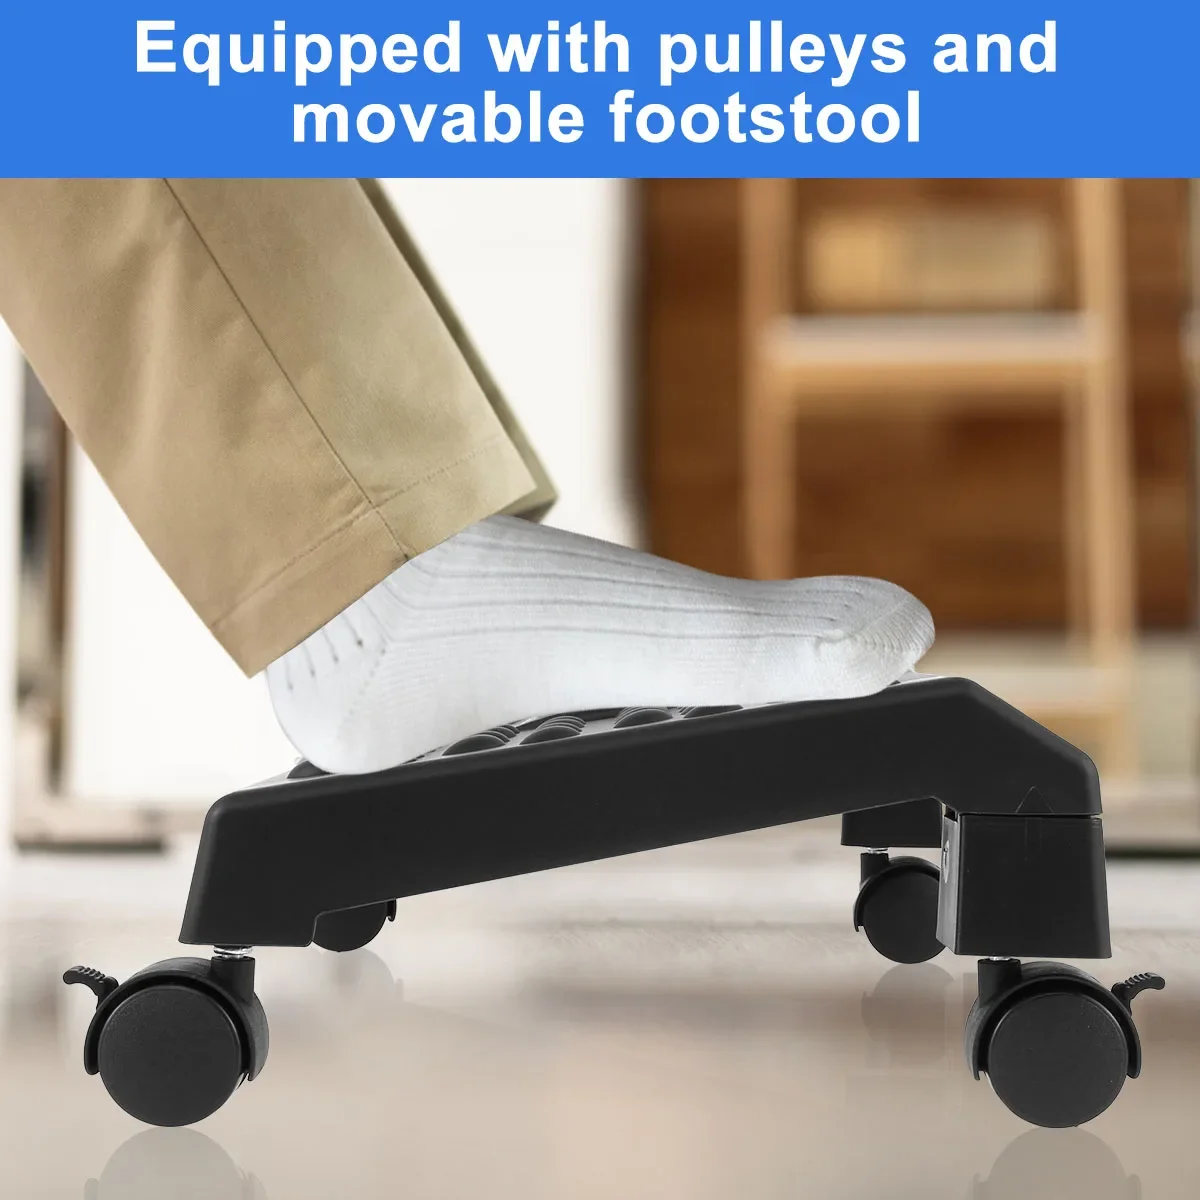 https://ae01.alicdn.com/kf/S6dd750a1a8794db4b0c42842d5a9ad67l/Foot-Rest-Plastic-Foot-Stool-Under-Desk-360-Rotatable-Movable-Footrest-Massager-Sturdy-Office-Footrest-Support.jpg